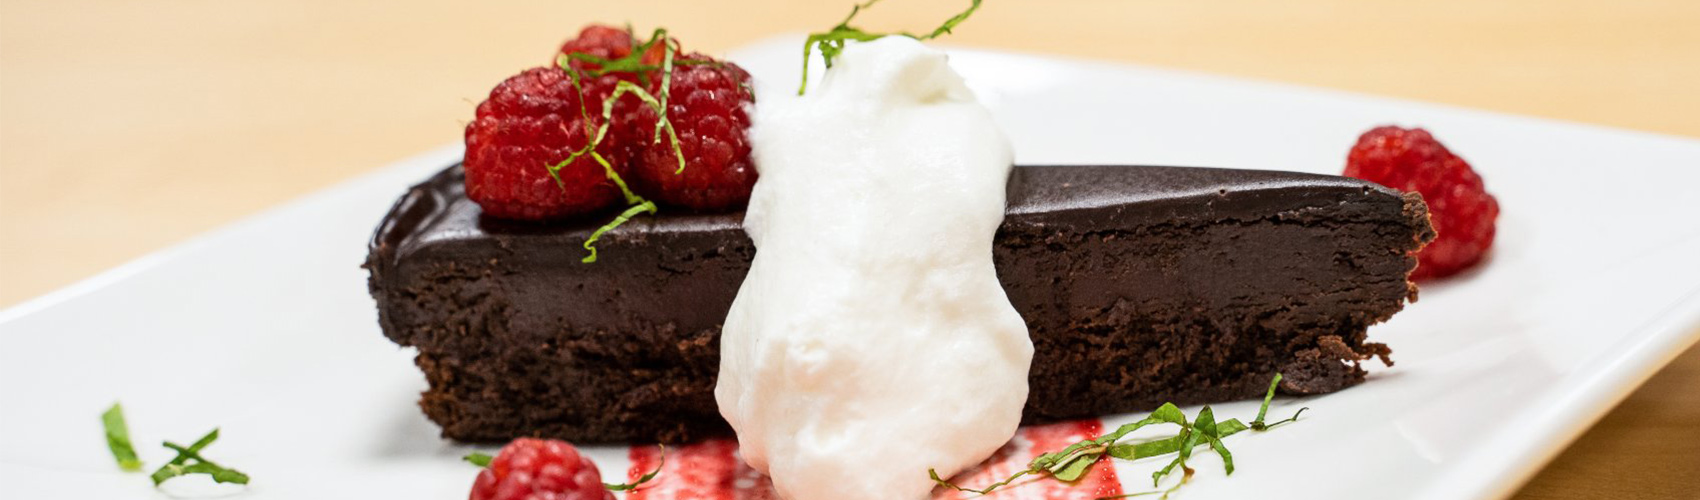 A slice of chocolate cake garnished with whipped cream and raspberries on a white square plate